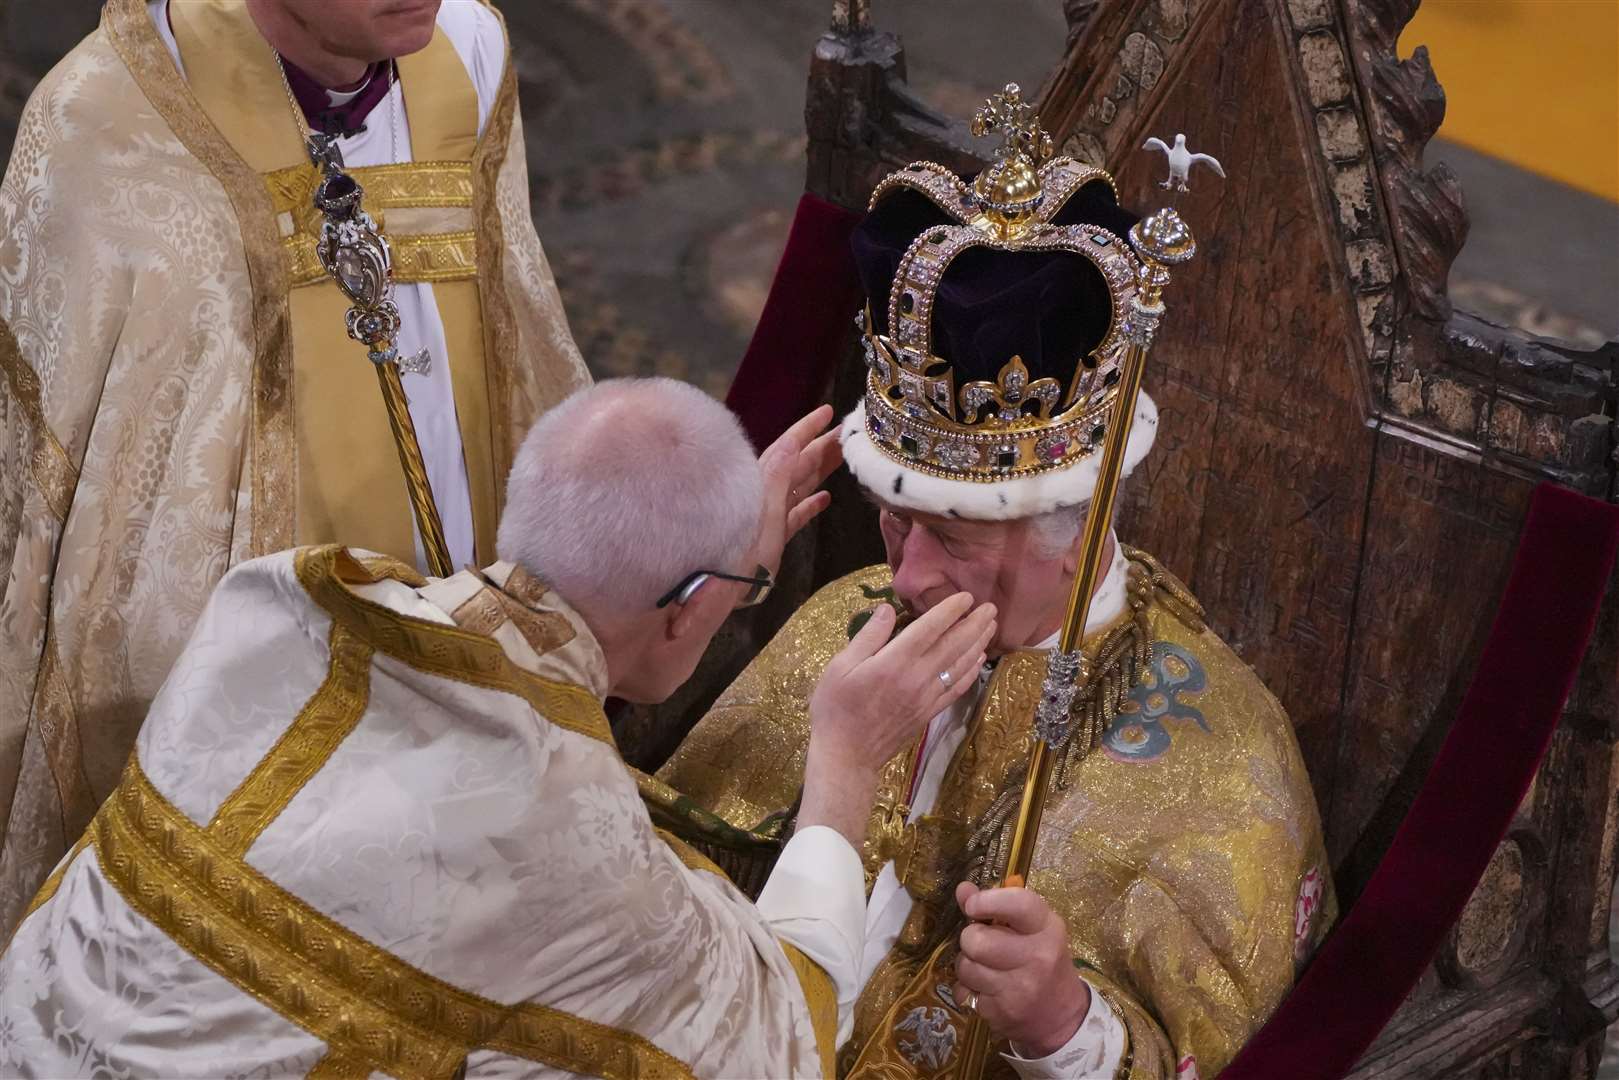 The King was crowned by the Archbishop of Canterbury during his coronation ceremony in Westminster Abbey (Aaron Chown/PA)